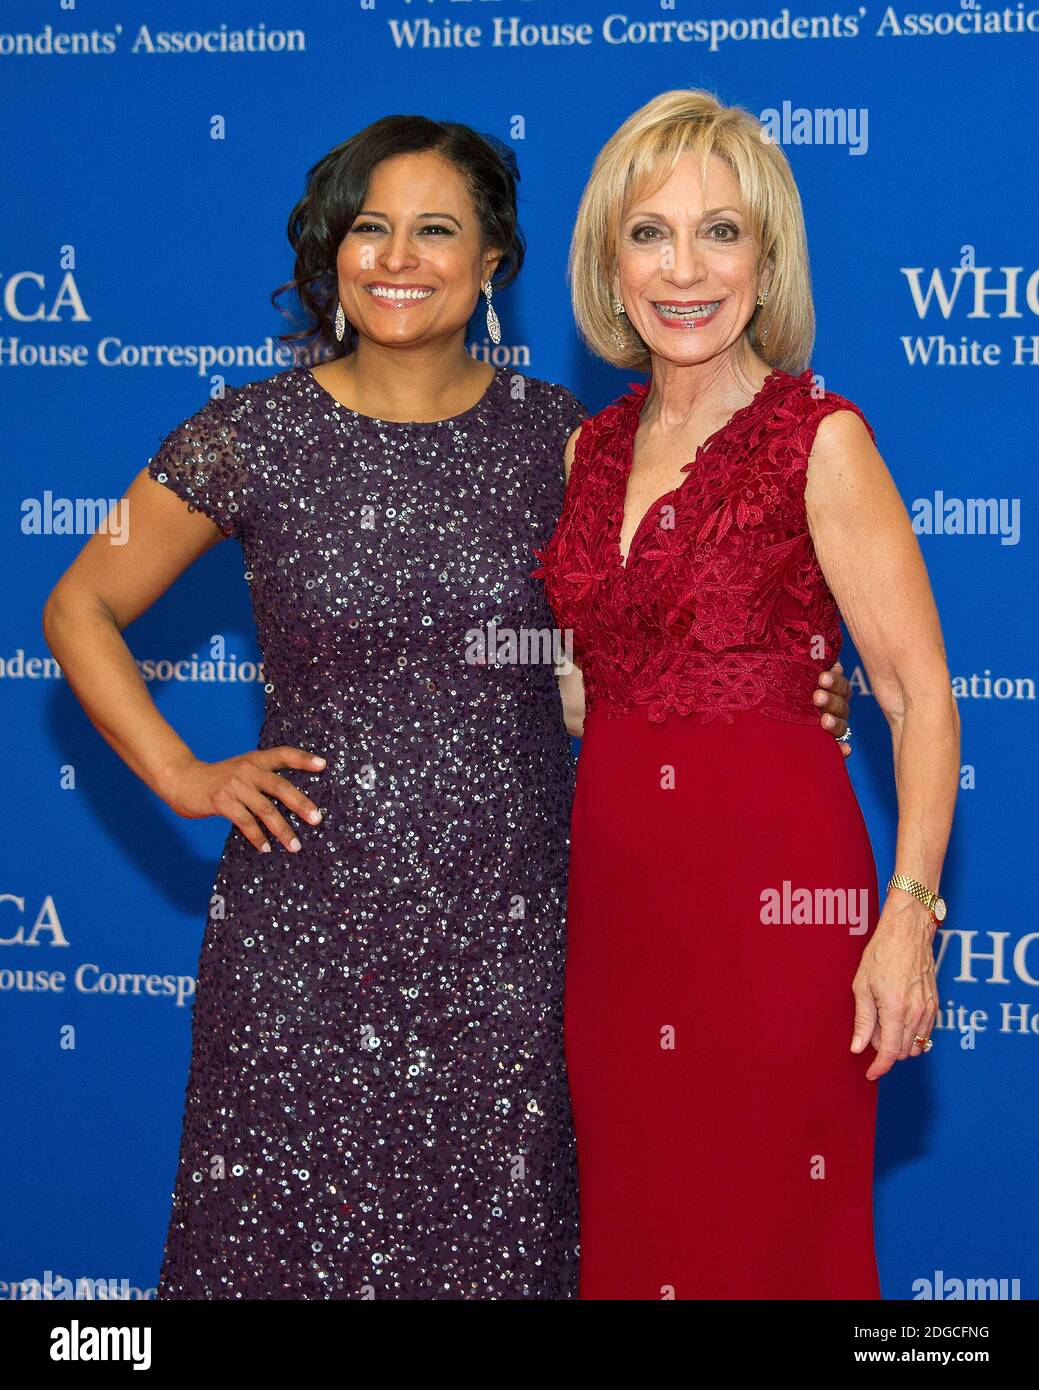 NBC News White House Correspondent Kristen Welker, left, and Andrea Mitchell arrive for the 2017 White House Correspondents Association Annual Dinner at the Washington Hilton Hotel in Washington, DC, USA, on Saturday April 29, 2017. Photo by Ron Sachs/CNP/ABACAPRESS.COM Stock Photo